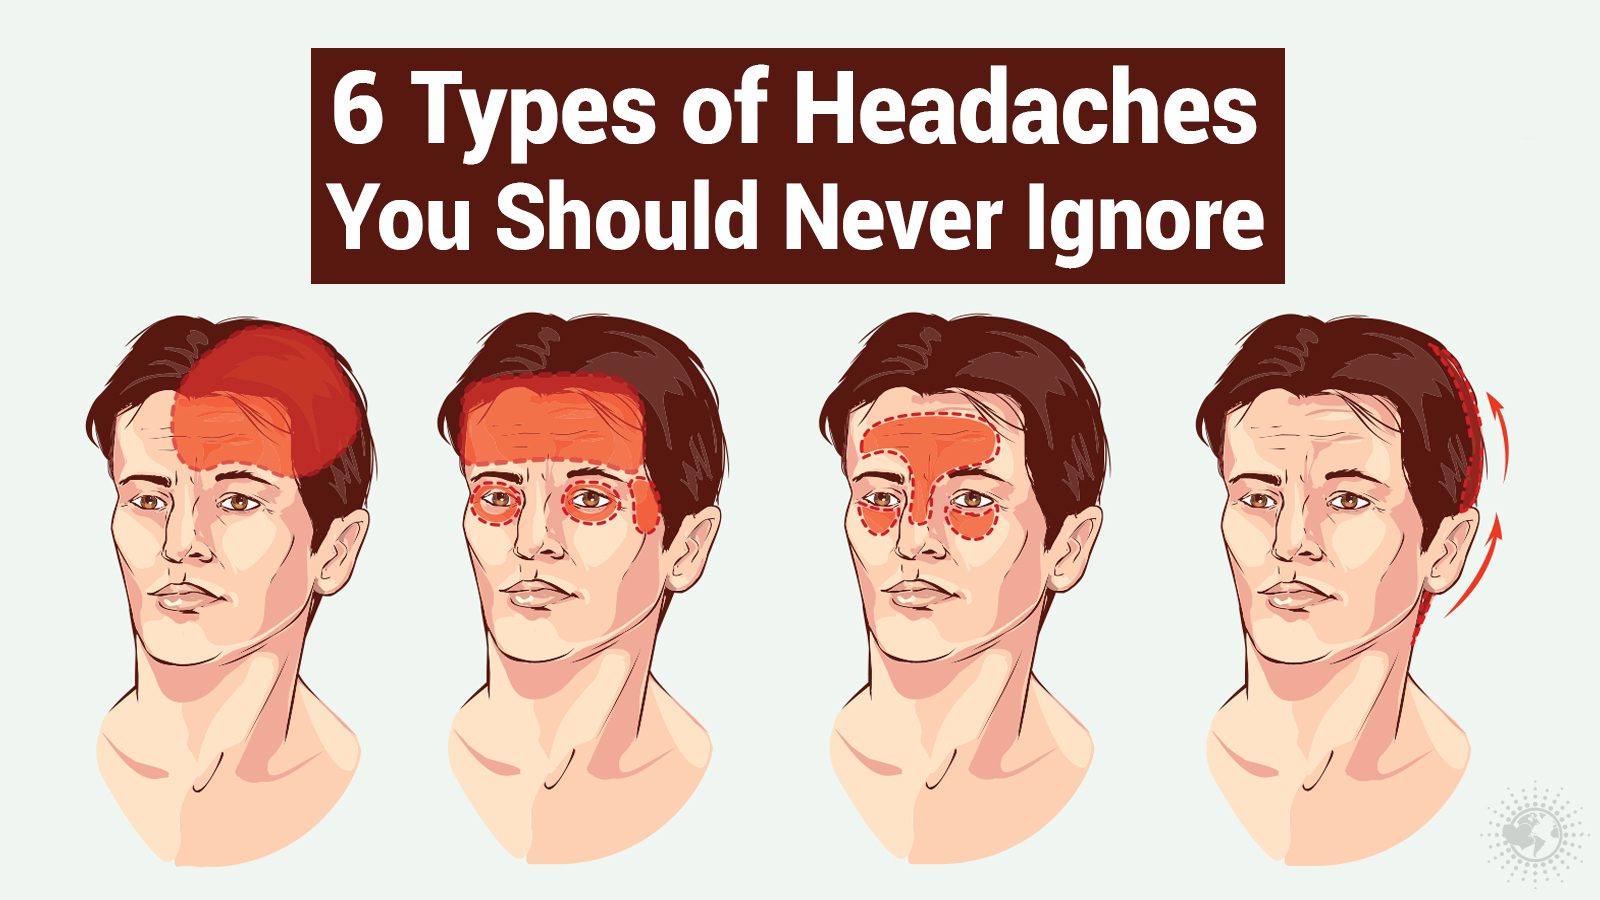 6 Types of Headaches You Should Never Ignore